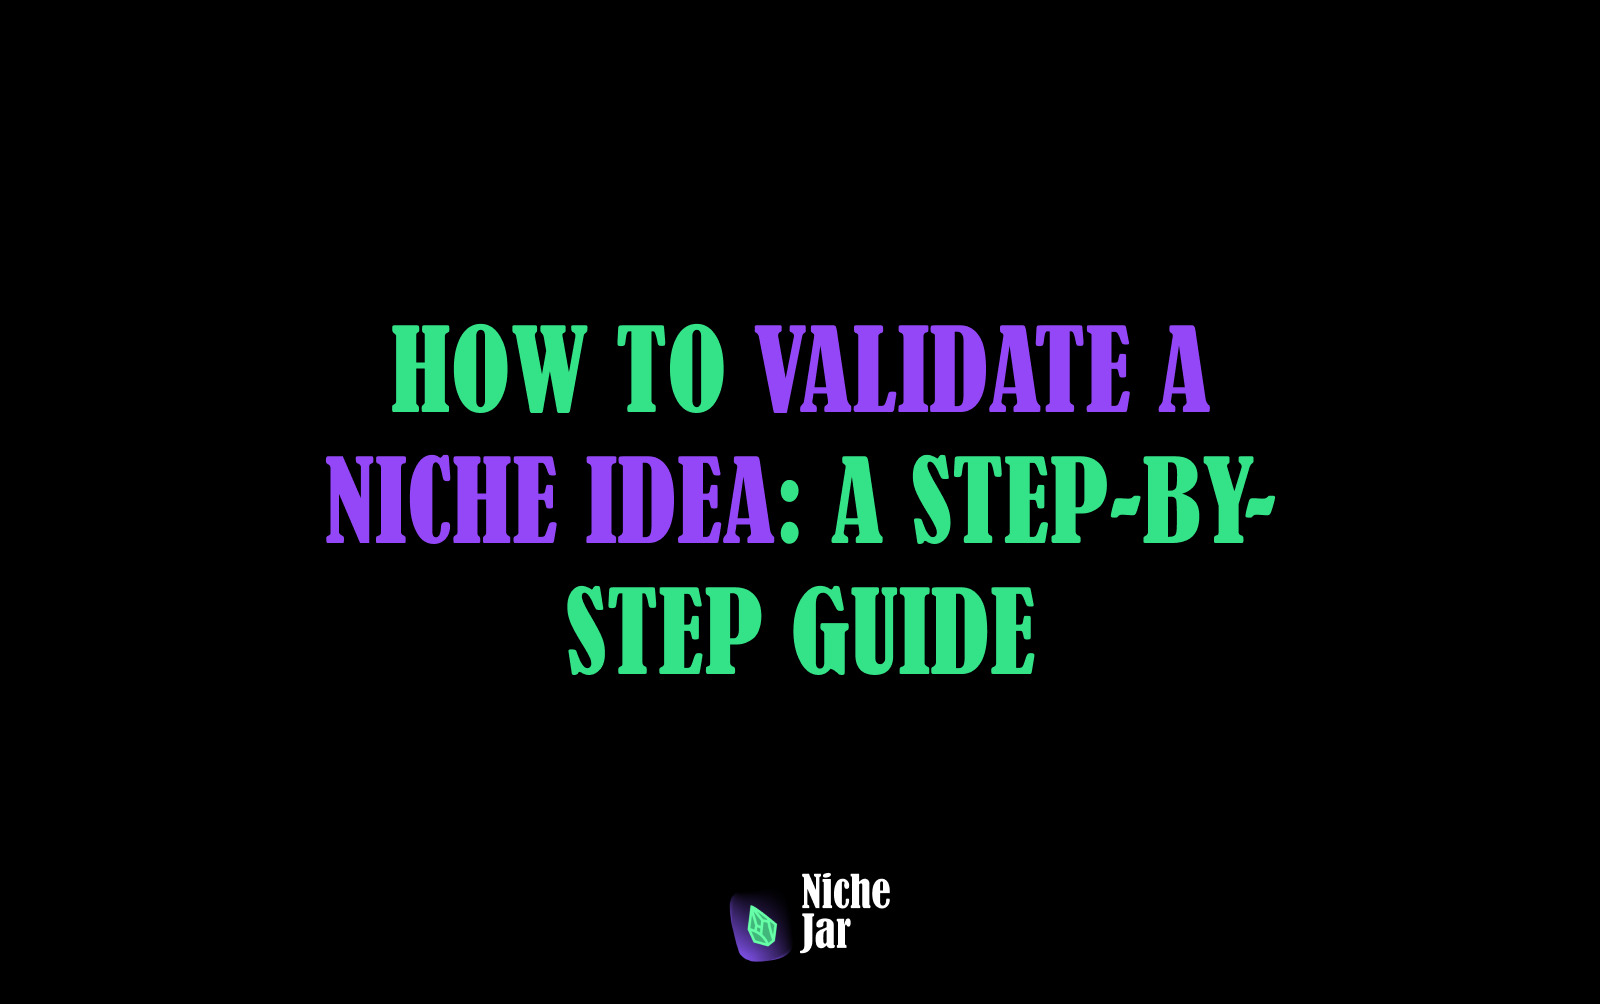 How to Validate a Niche Idea A Step-by-Step Guide